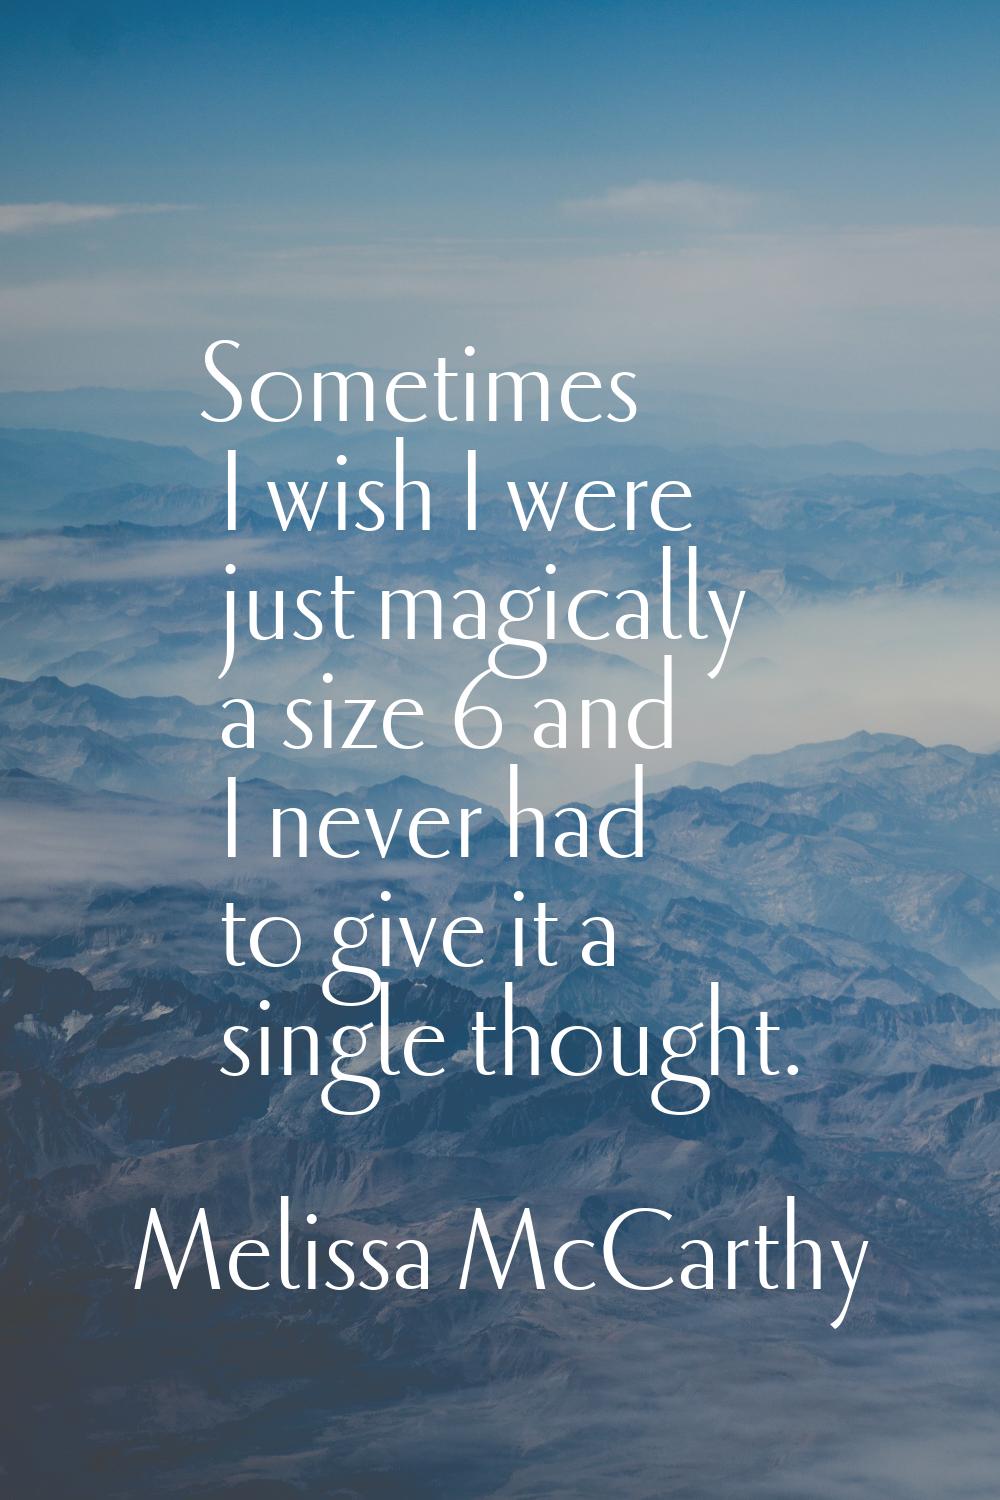 Sometimes I wish I were just magically a size 6 and I never had to give it a single thought.